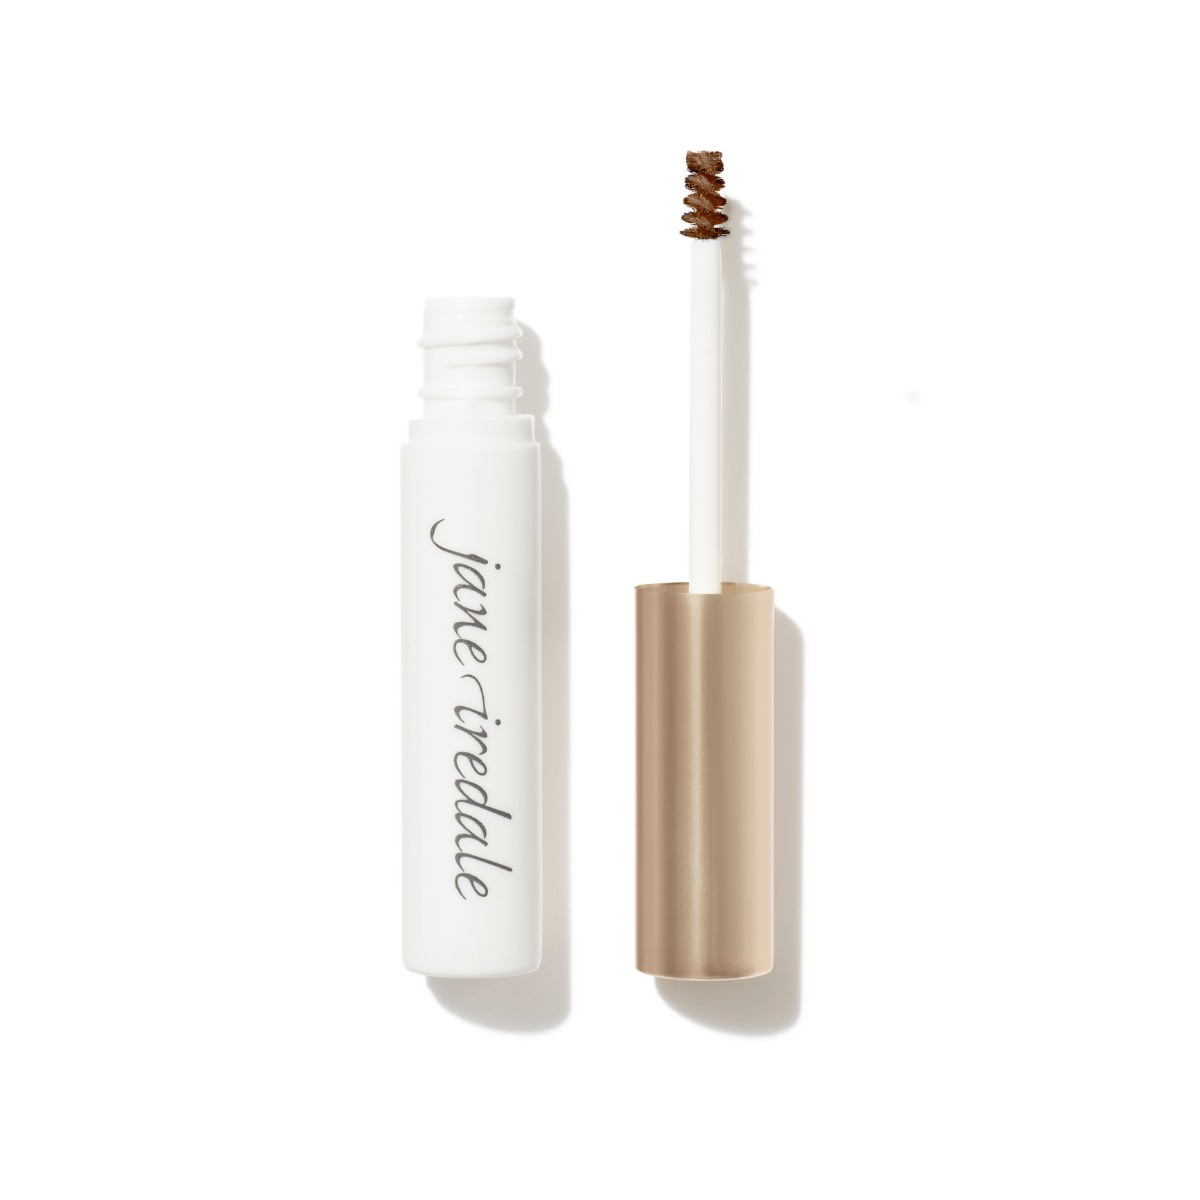 Jane Iredale PureBrow Brow Gel in Ash Blonde Shop At Exclusive Beauty